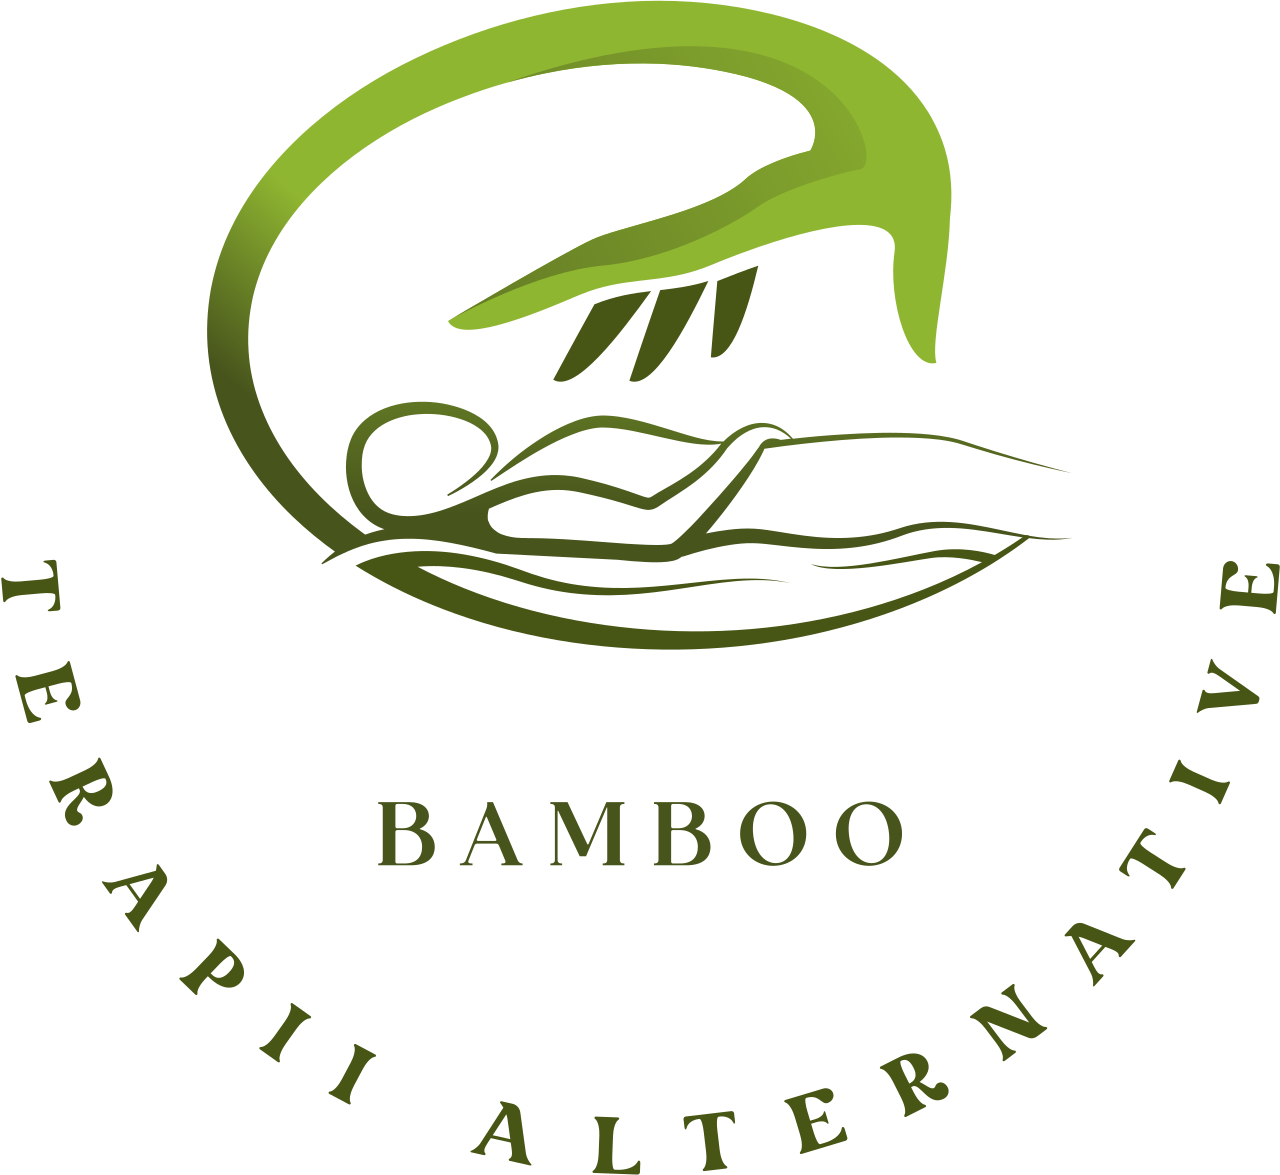  BAMBOO 's web page